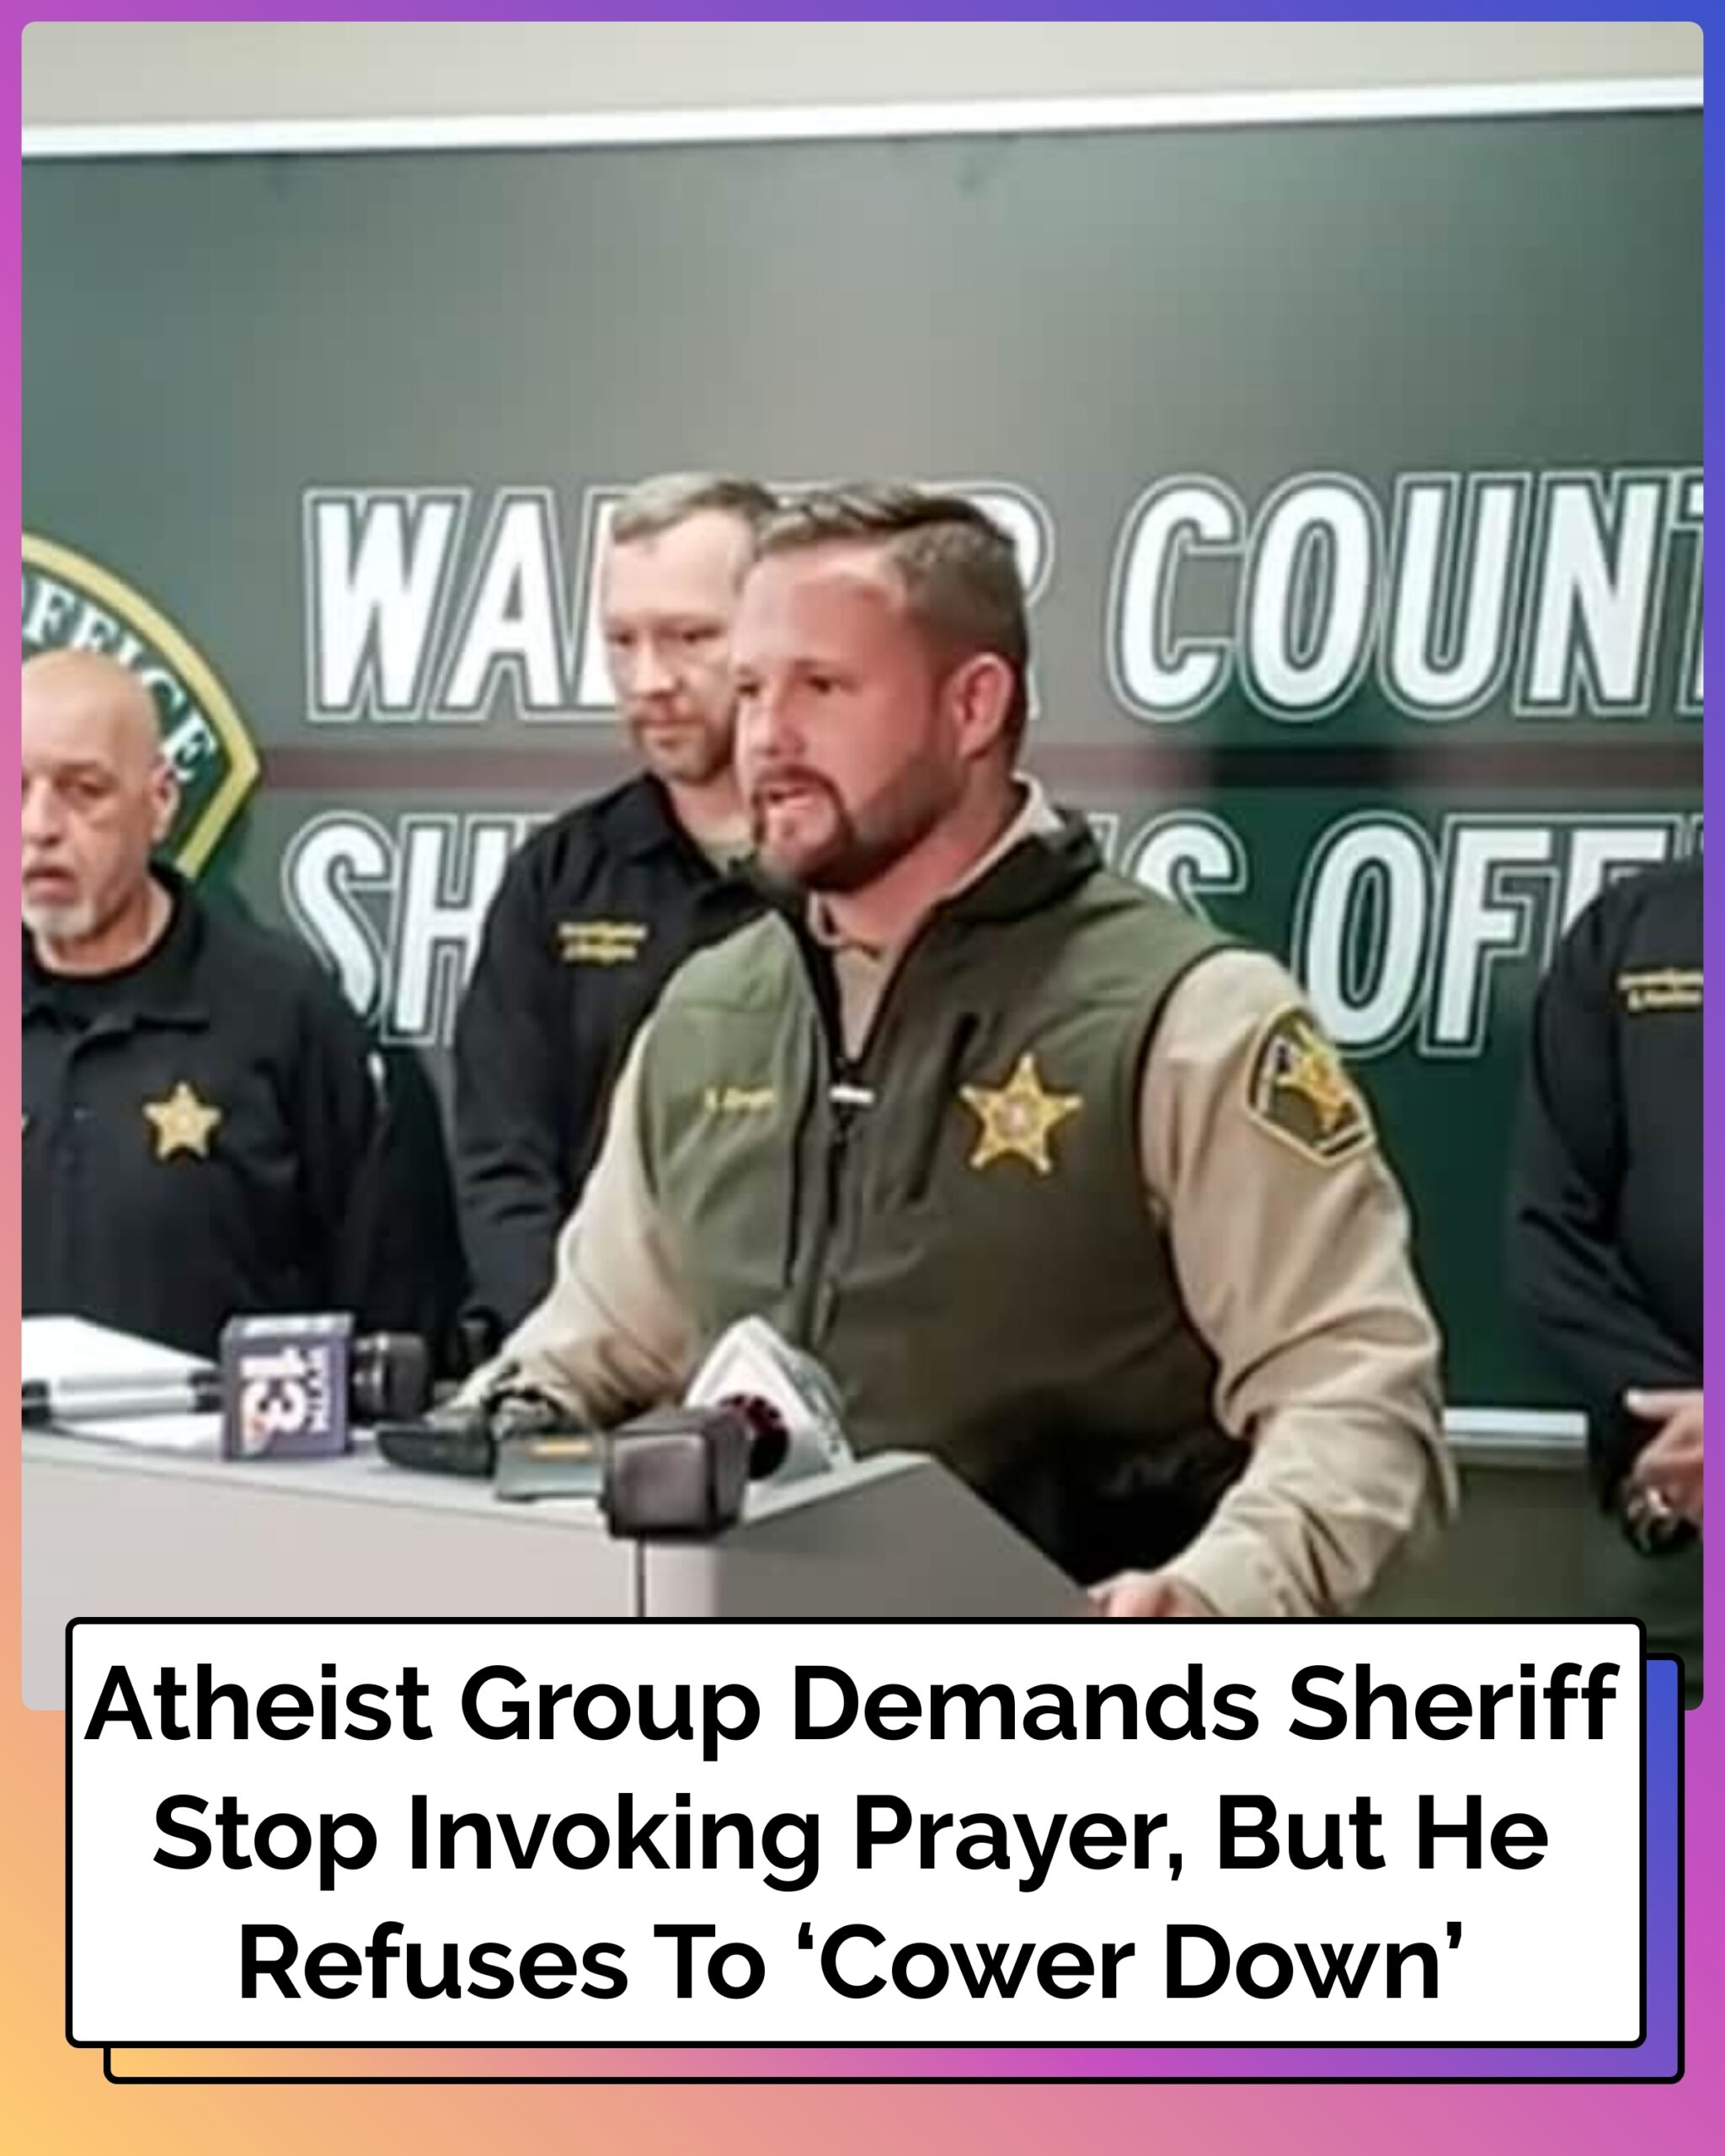 Atheist Group Demands Sheriff Stop Invoking Prayer, But He Refuses To ‘Cower Down’